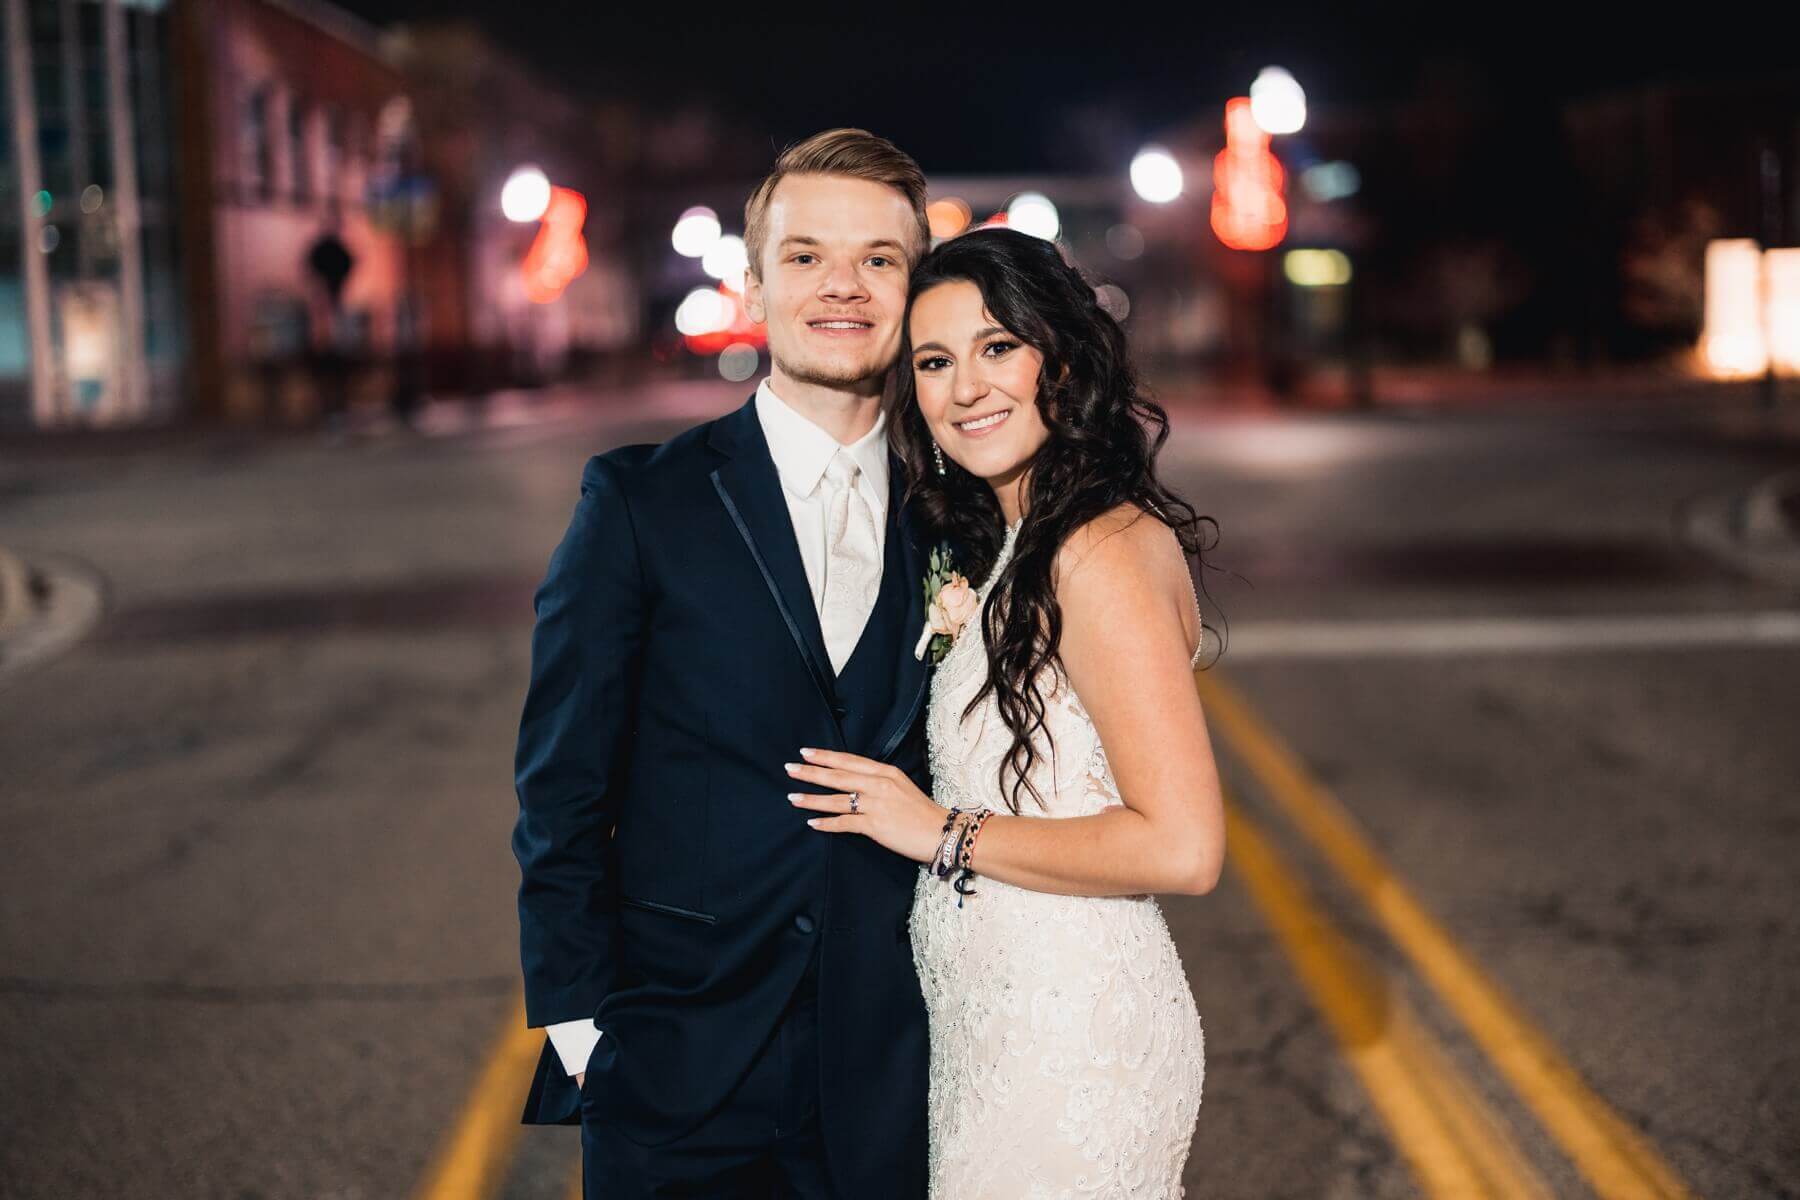 Bride and groom standing in road for night picture at wedding venue in Illinois